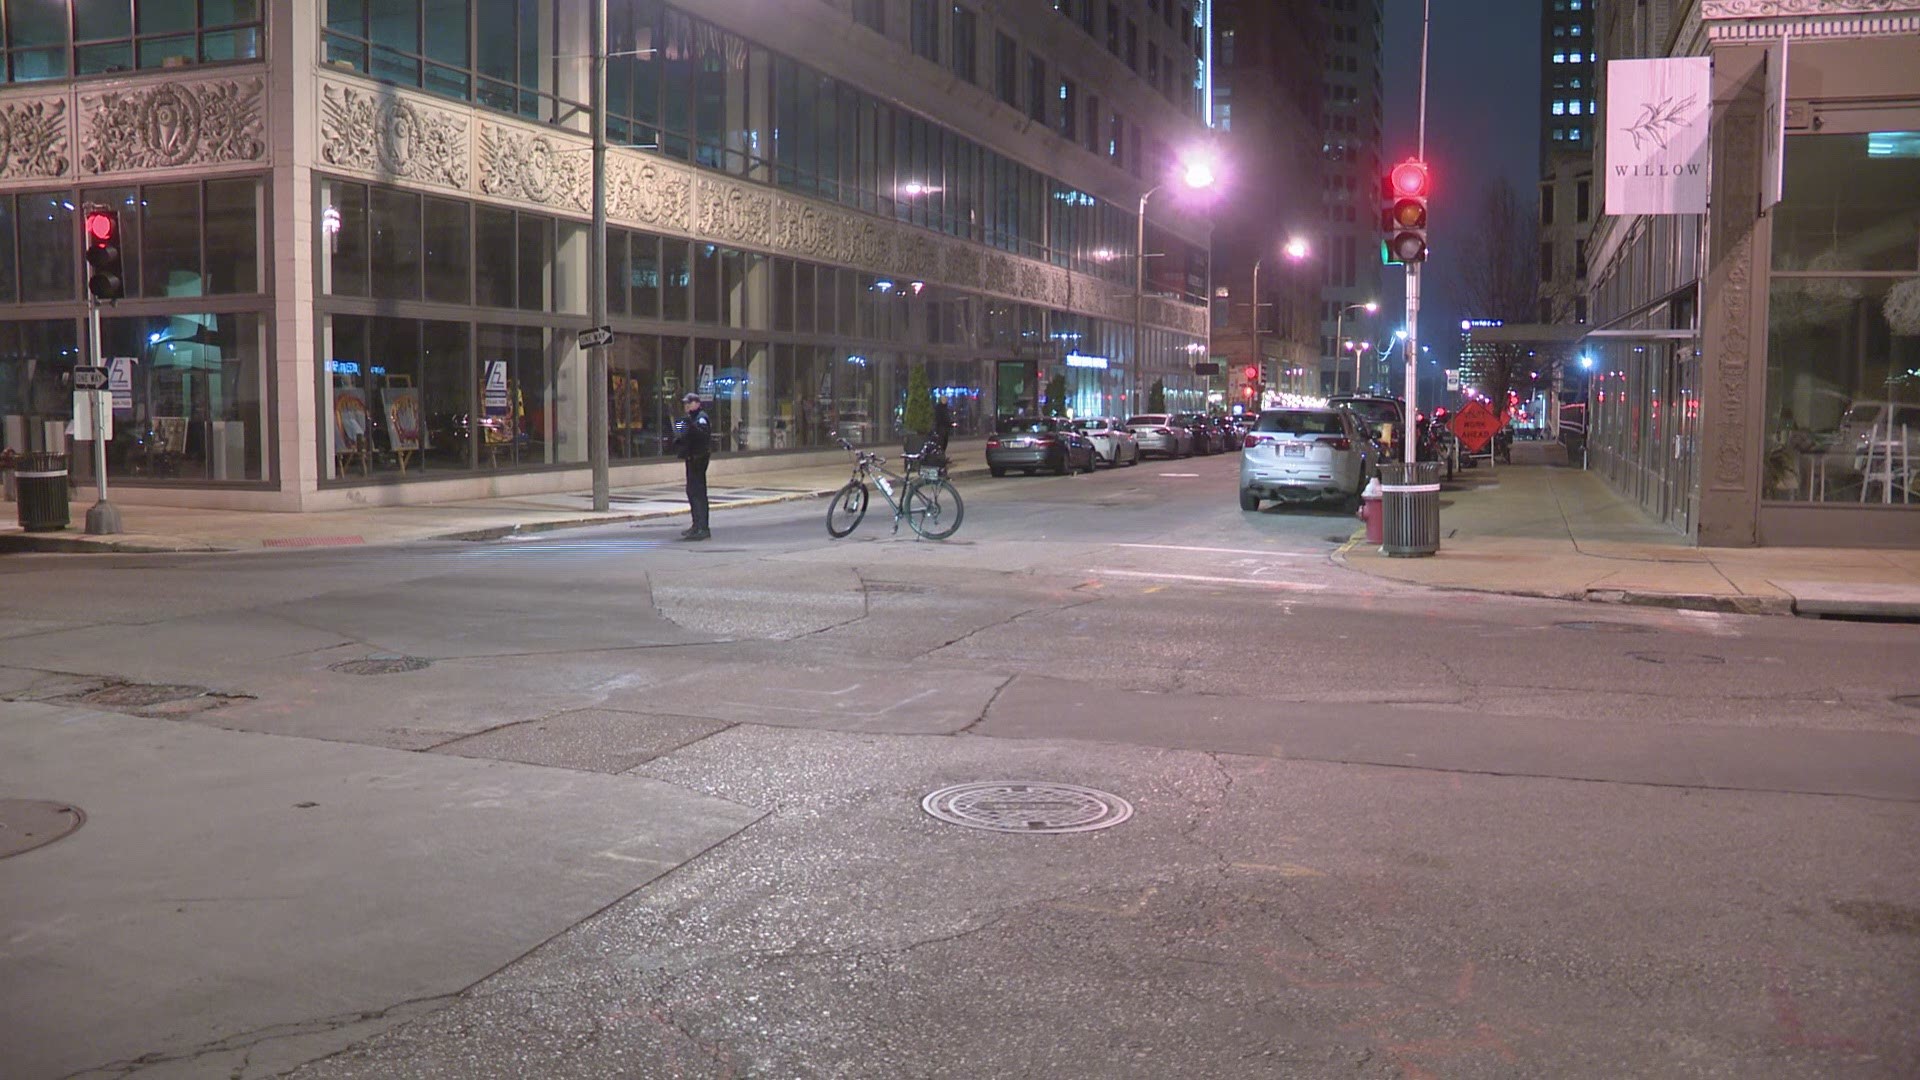 A man was shot in downtown St. Louis Wednesday evening